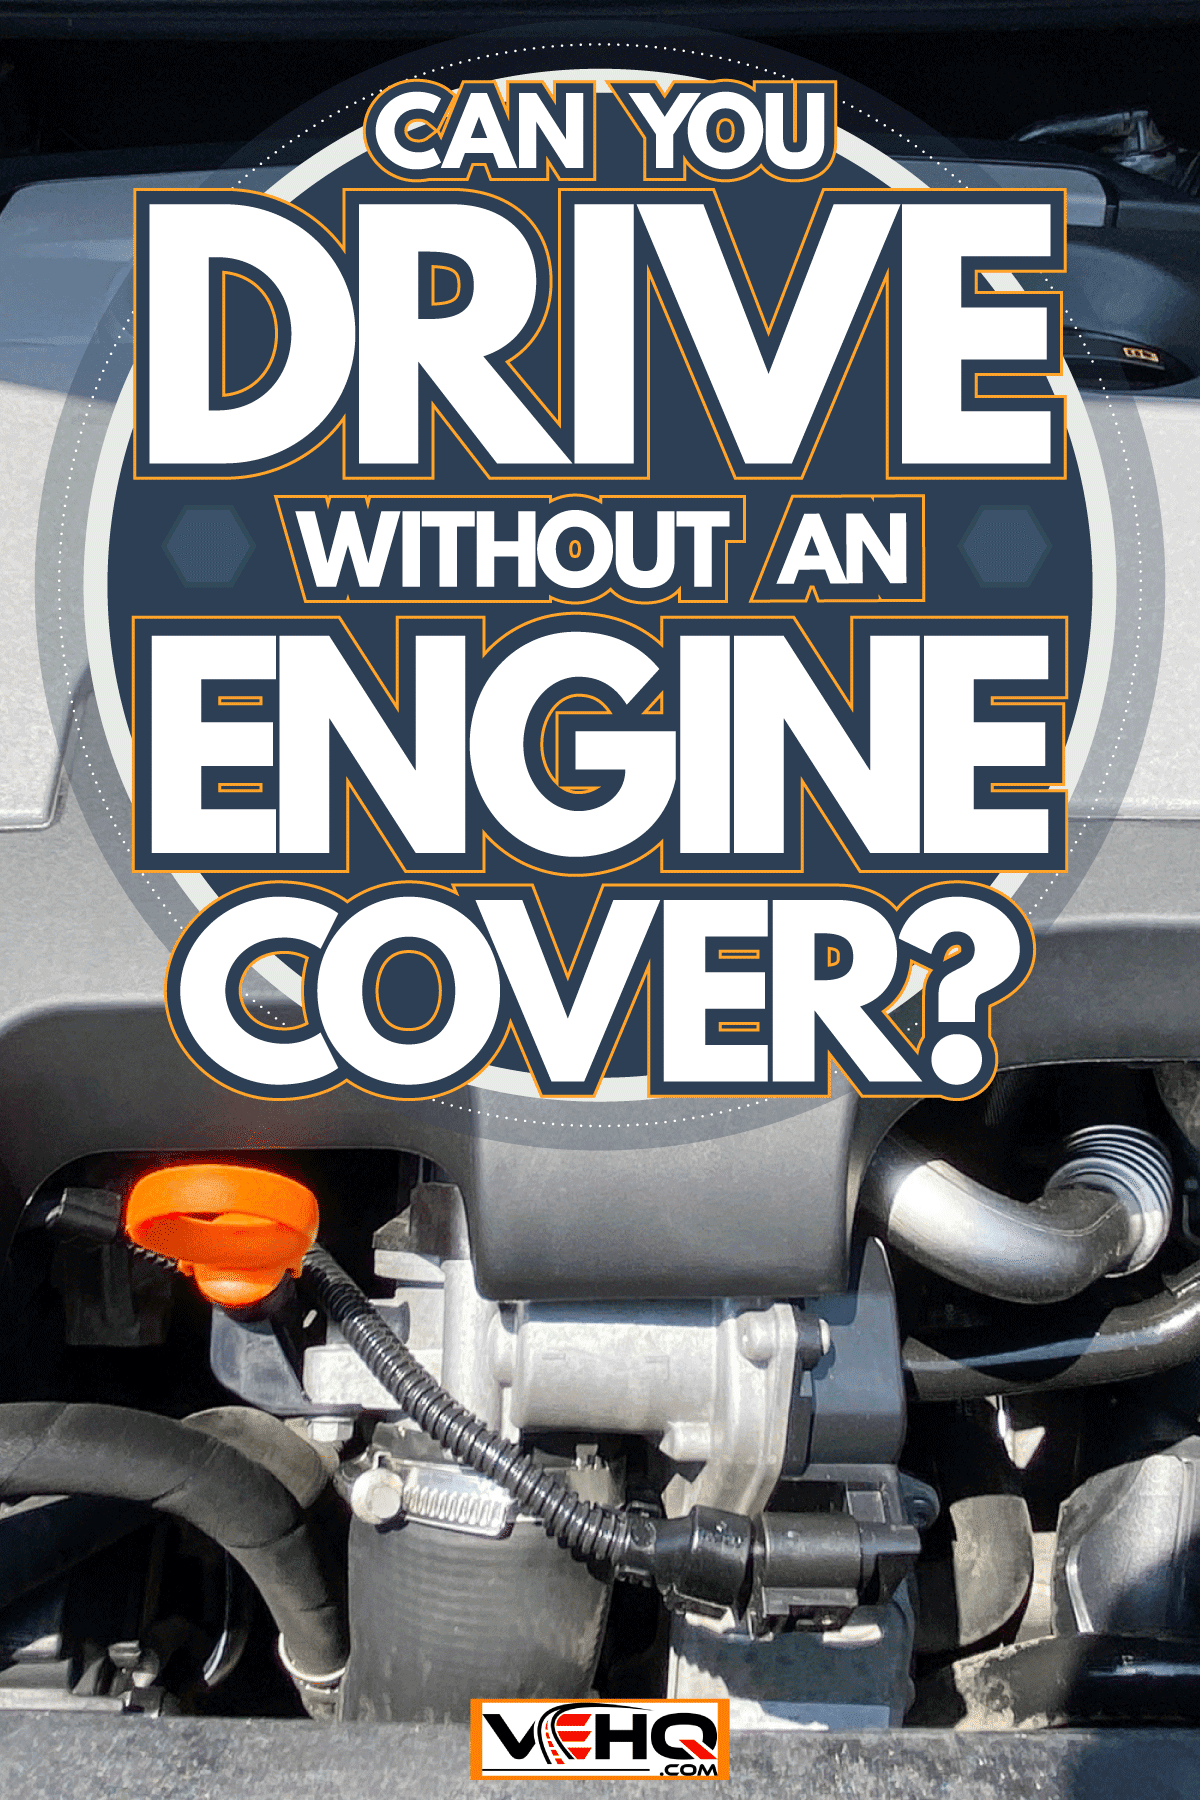 Clean and modern car engine motor, Can You Drive Without An Engine Cover?